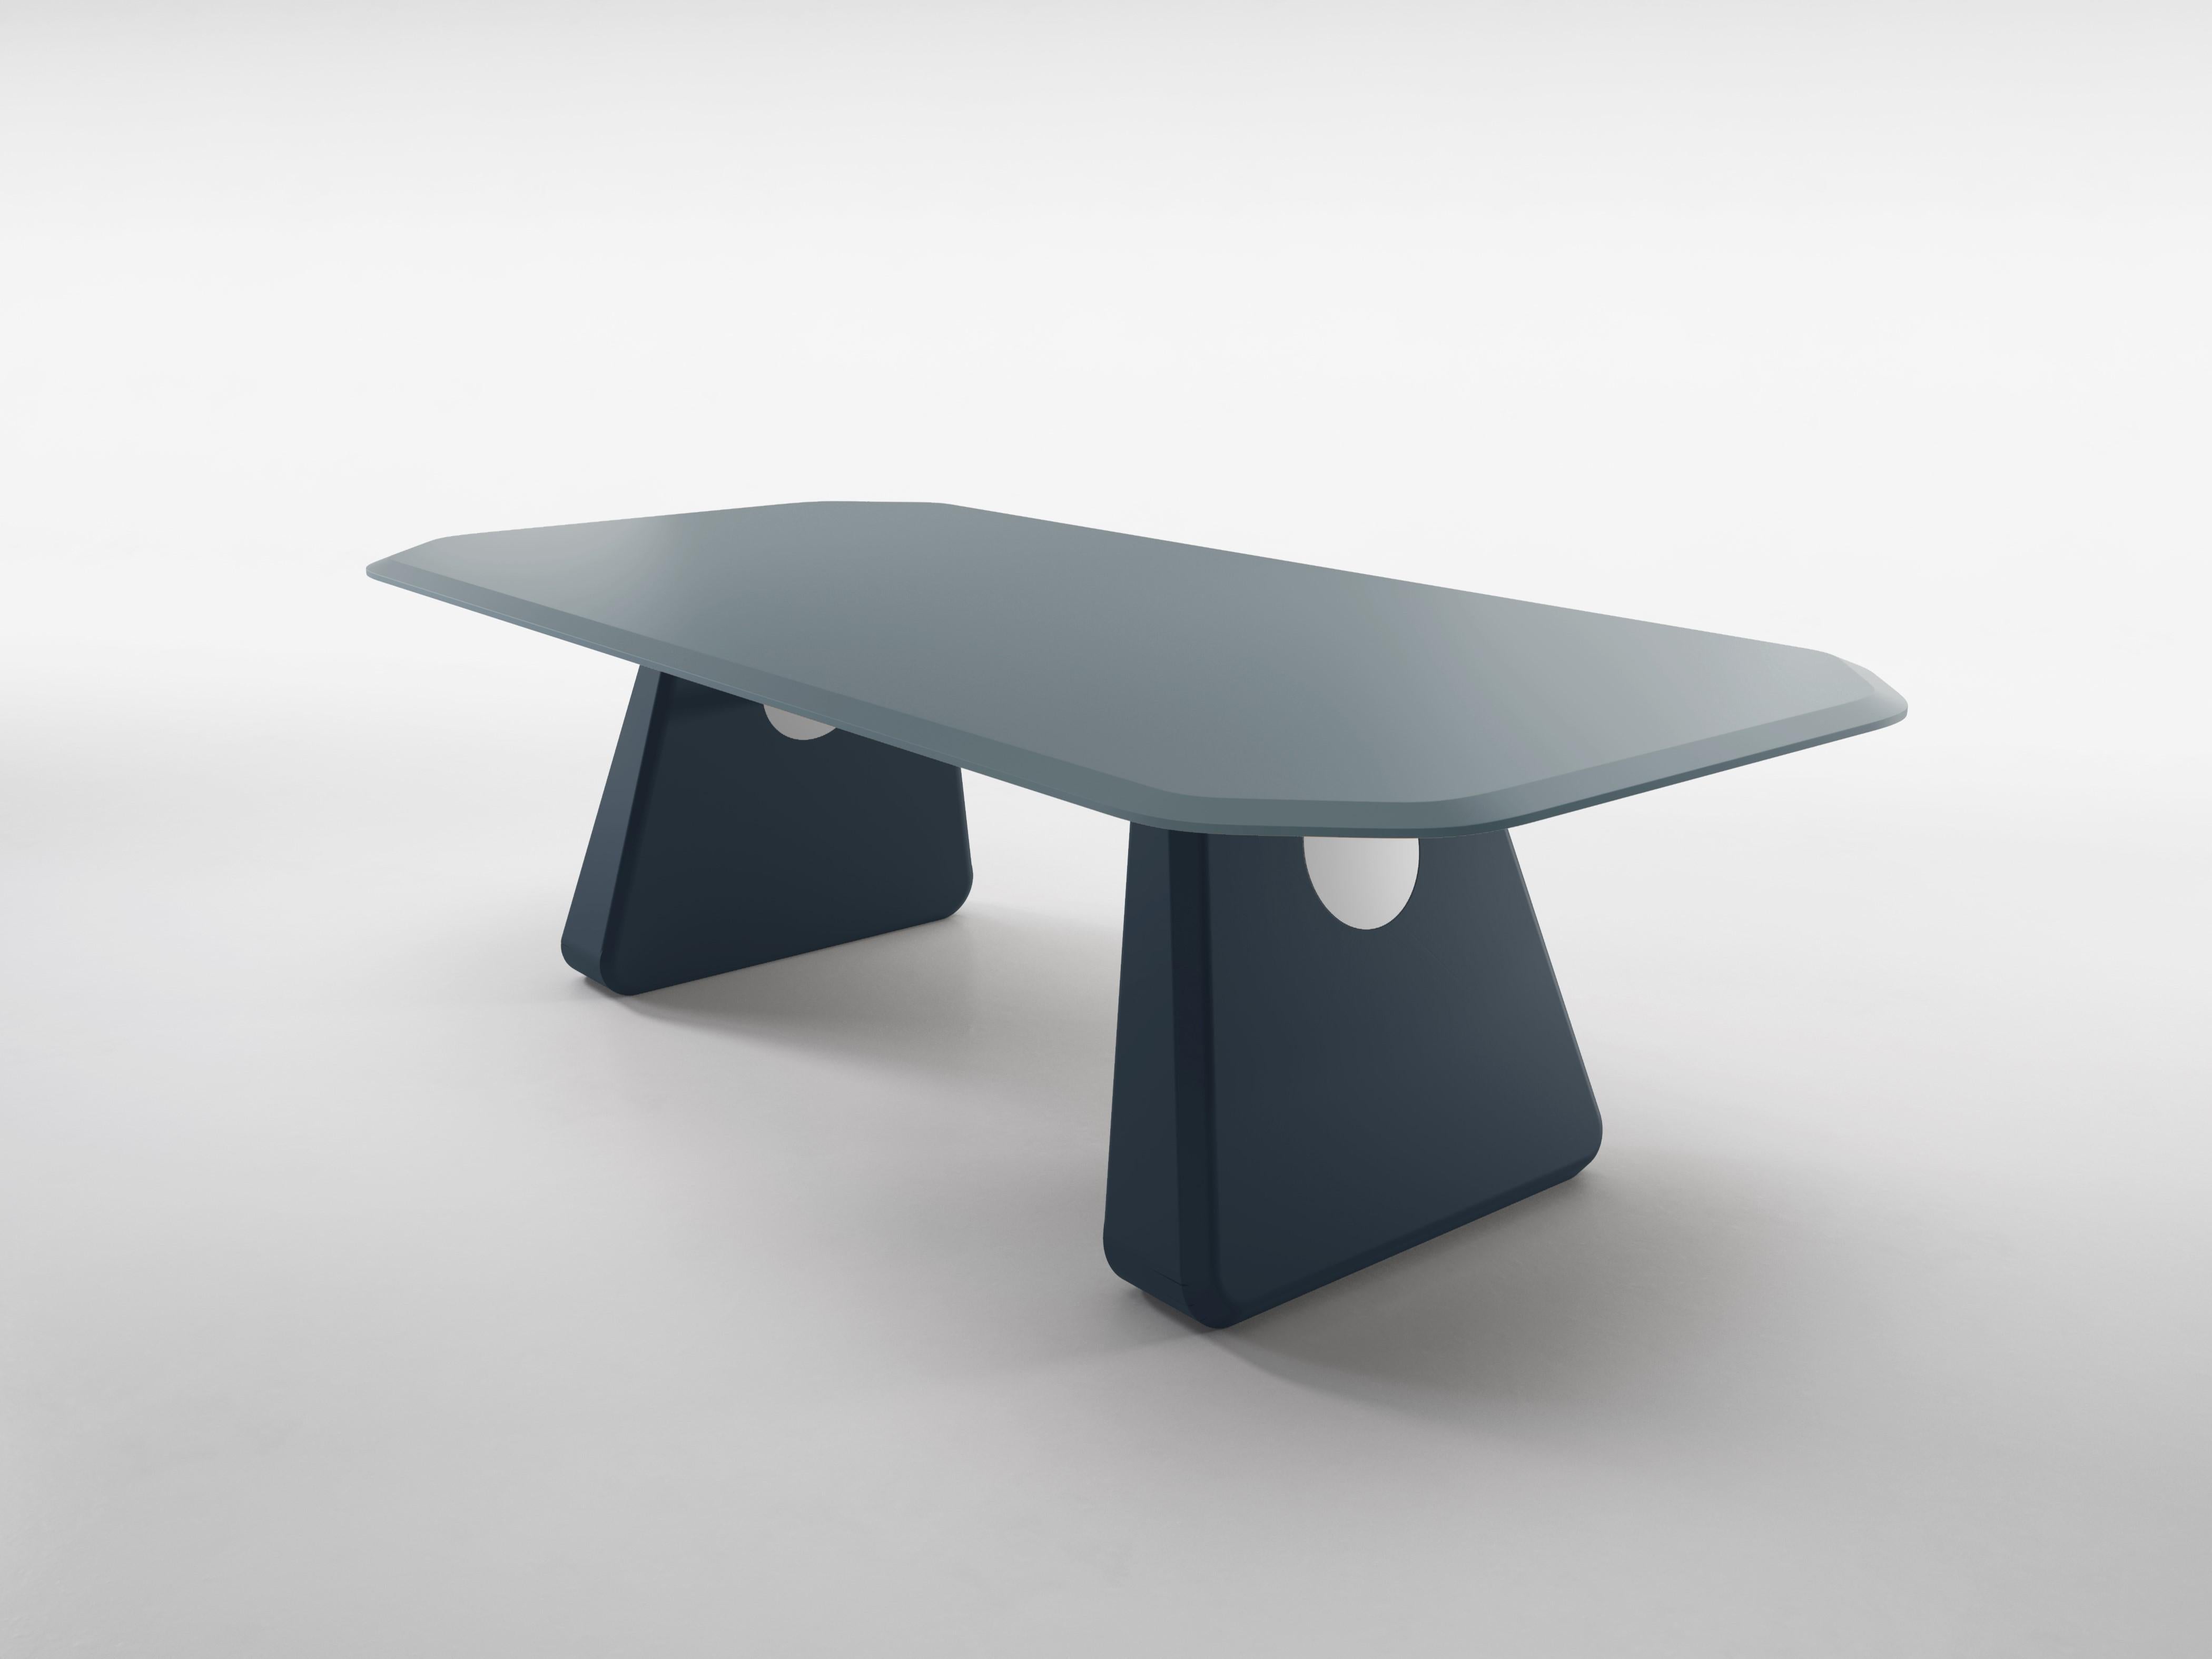 The Henge table features a lacquered top, supported by two large stone-like plinths. A beautifully detailed bar spans the distance between them and holds the two together. Henge takes its name from a famous rock formation in England but is heavily